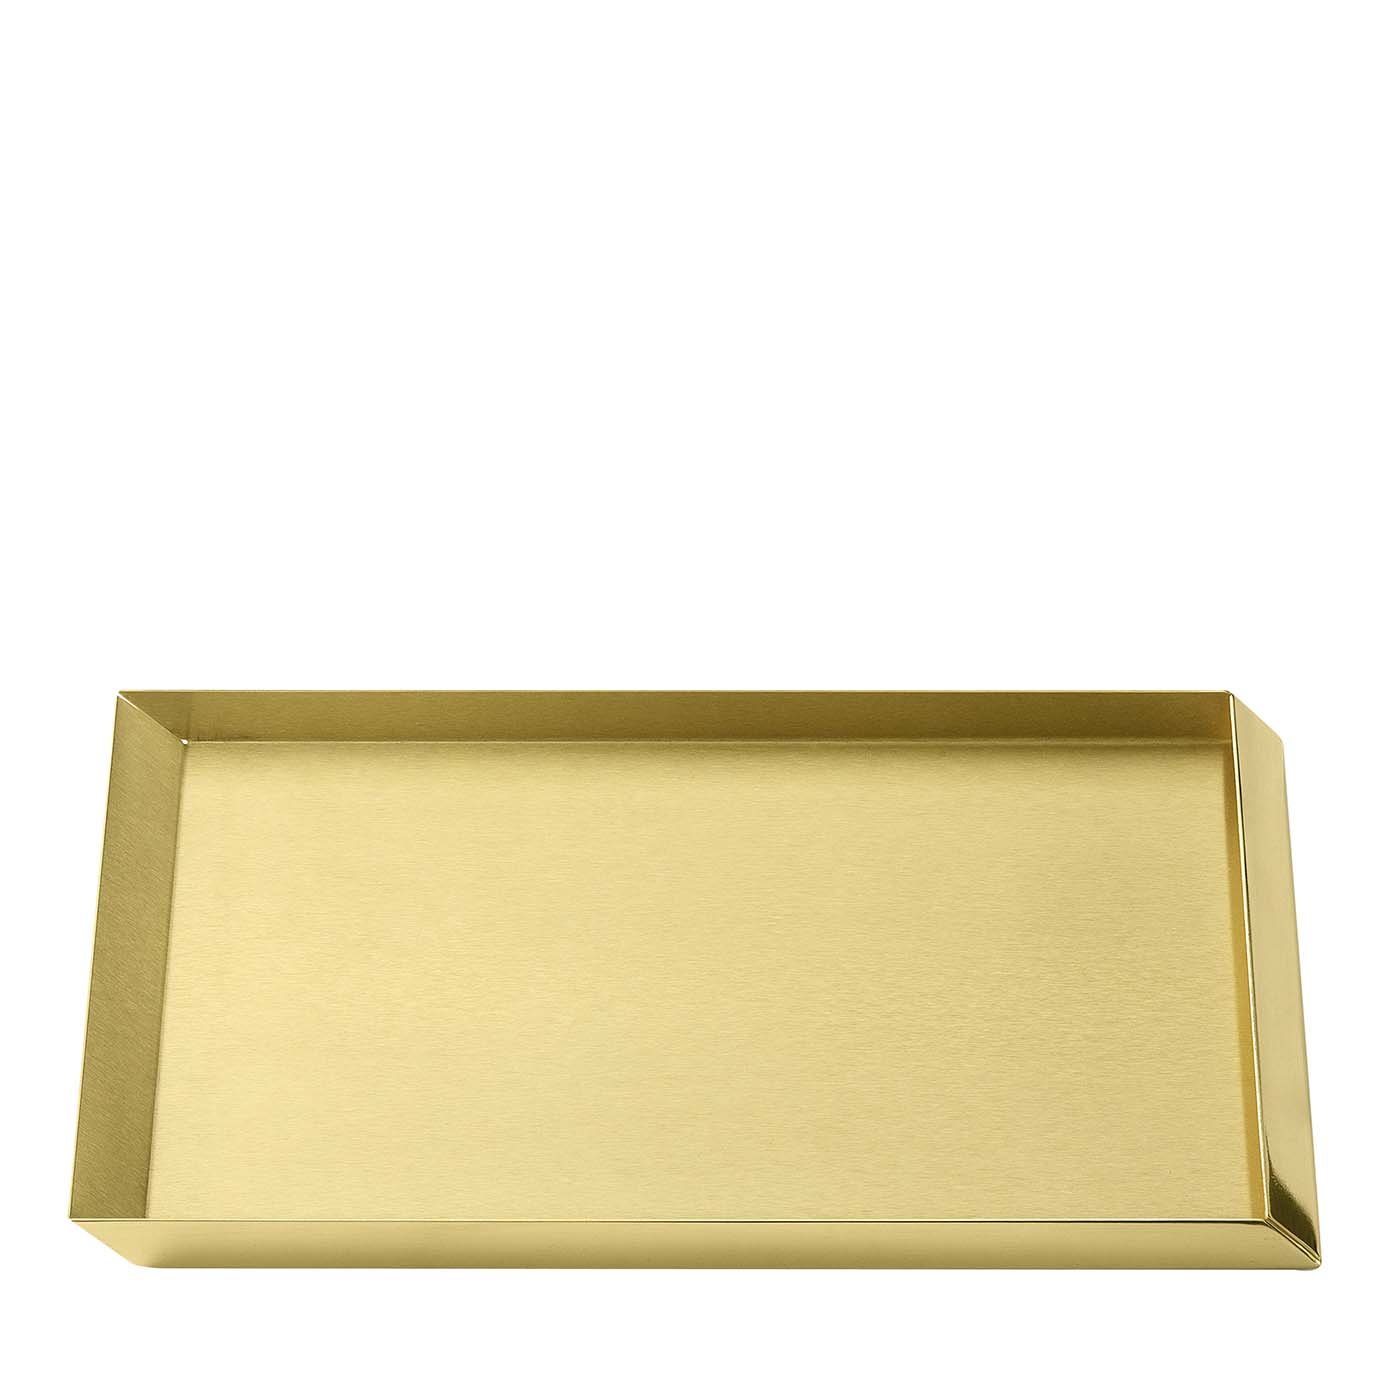 Axonometry A4 Desk Brass Tray by Elisa Giovannoni - Main view